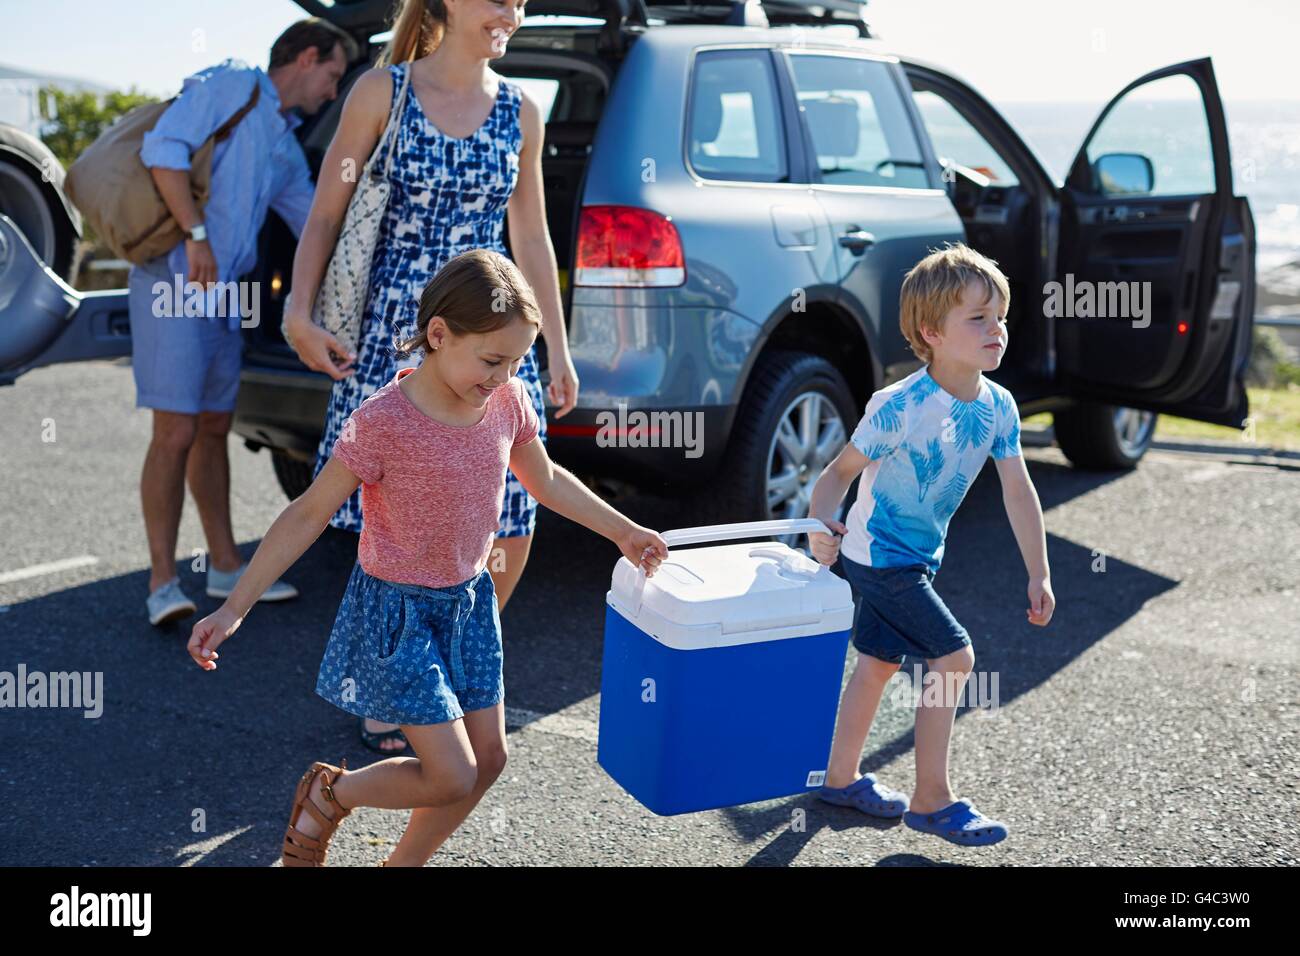 MODEL RELEASED. Family with two children carrying picnic cold box. Stock Photo